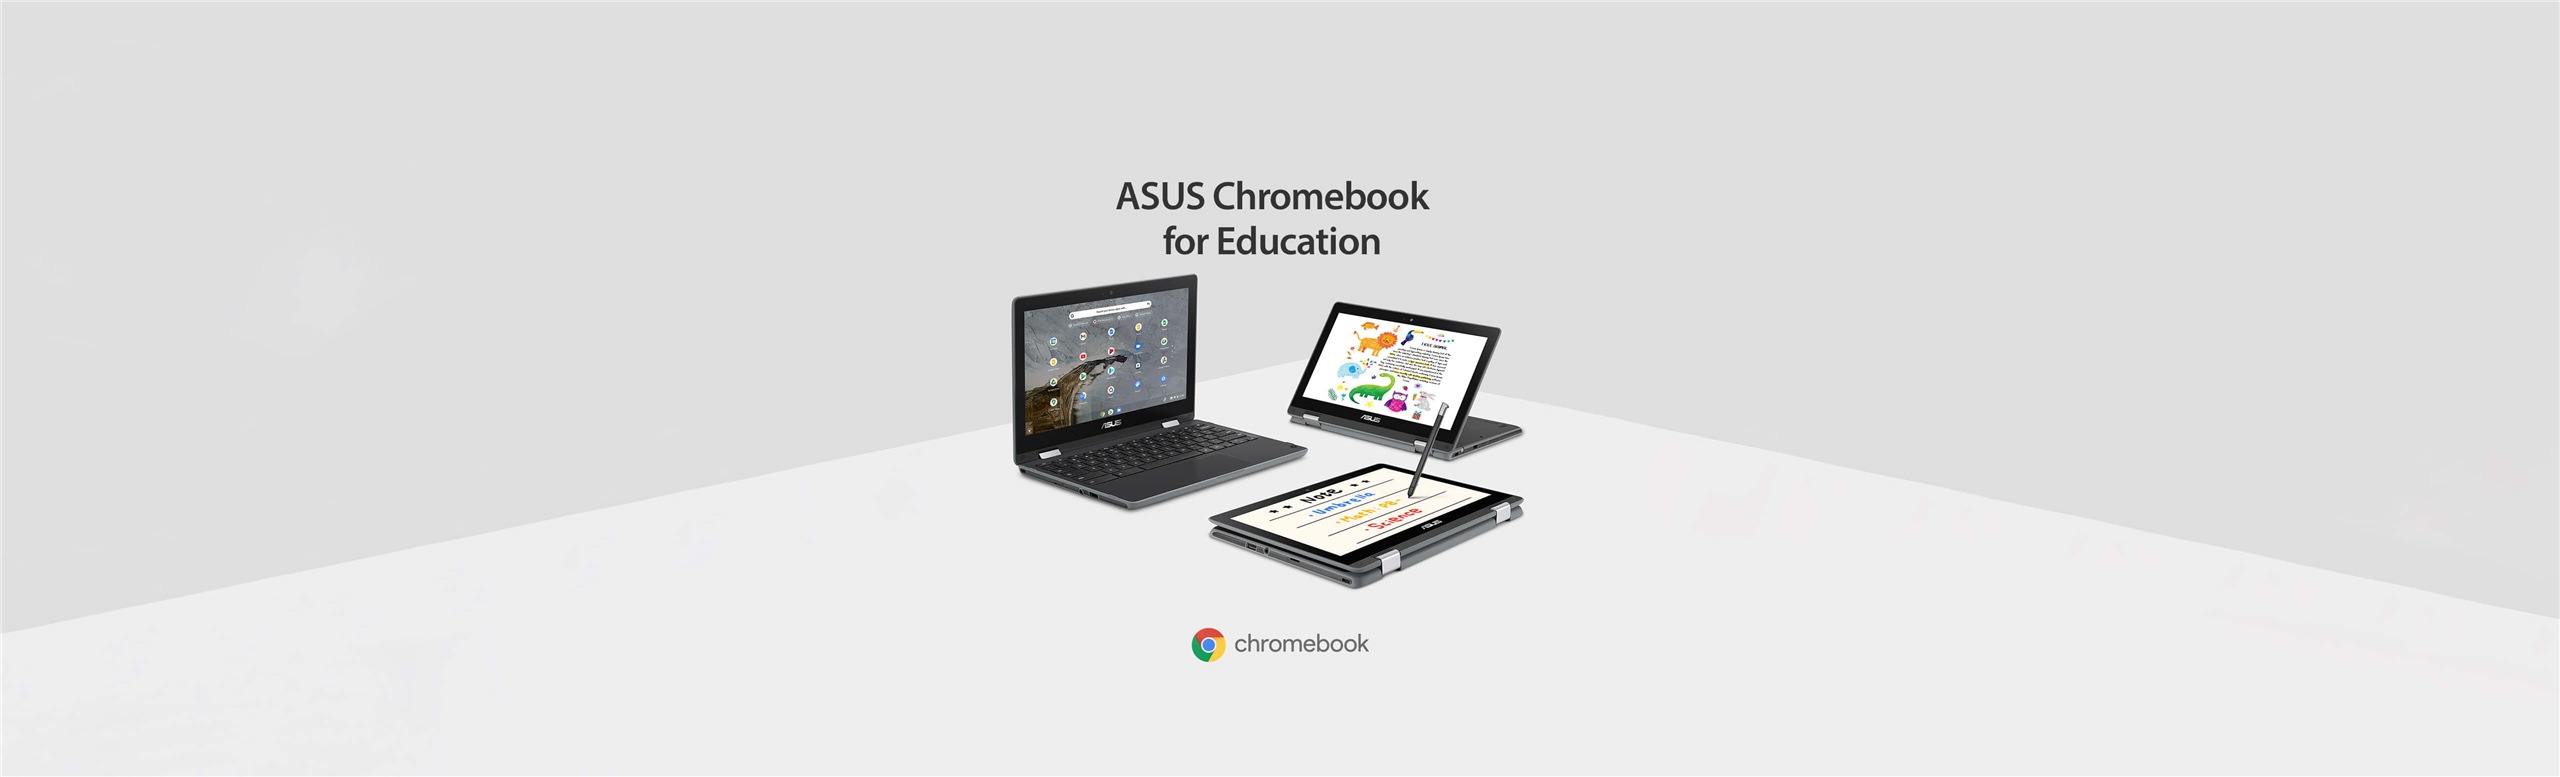 Three ASUS Chromebook CR1 series laptops are shown. The left one is in laptop mode showing its display and keyboard. The one at the back is shown in stand mode with images and words on screen. The one at the front is in tablet mode with a garaged stylus writing on the screen.